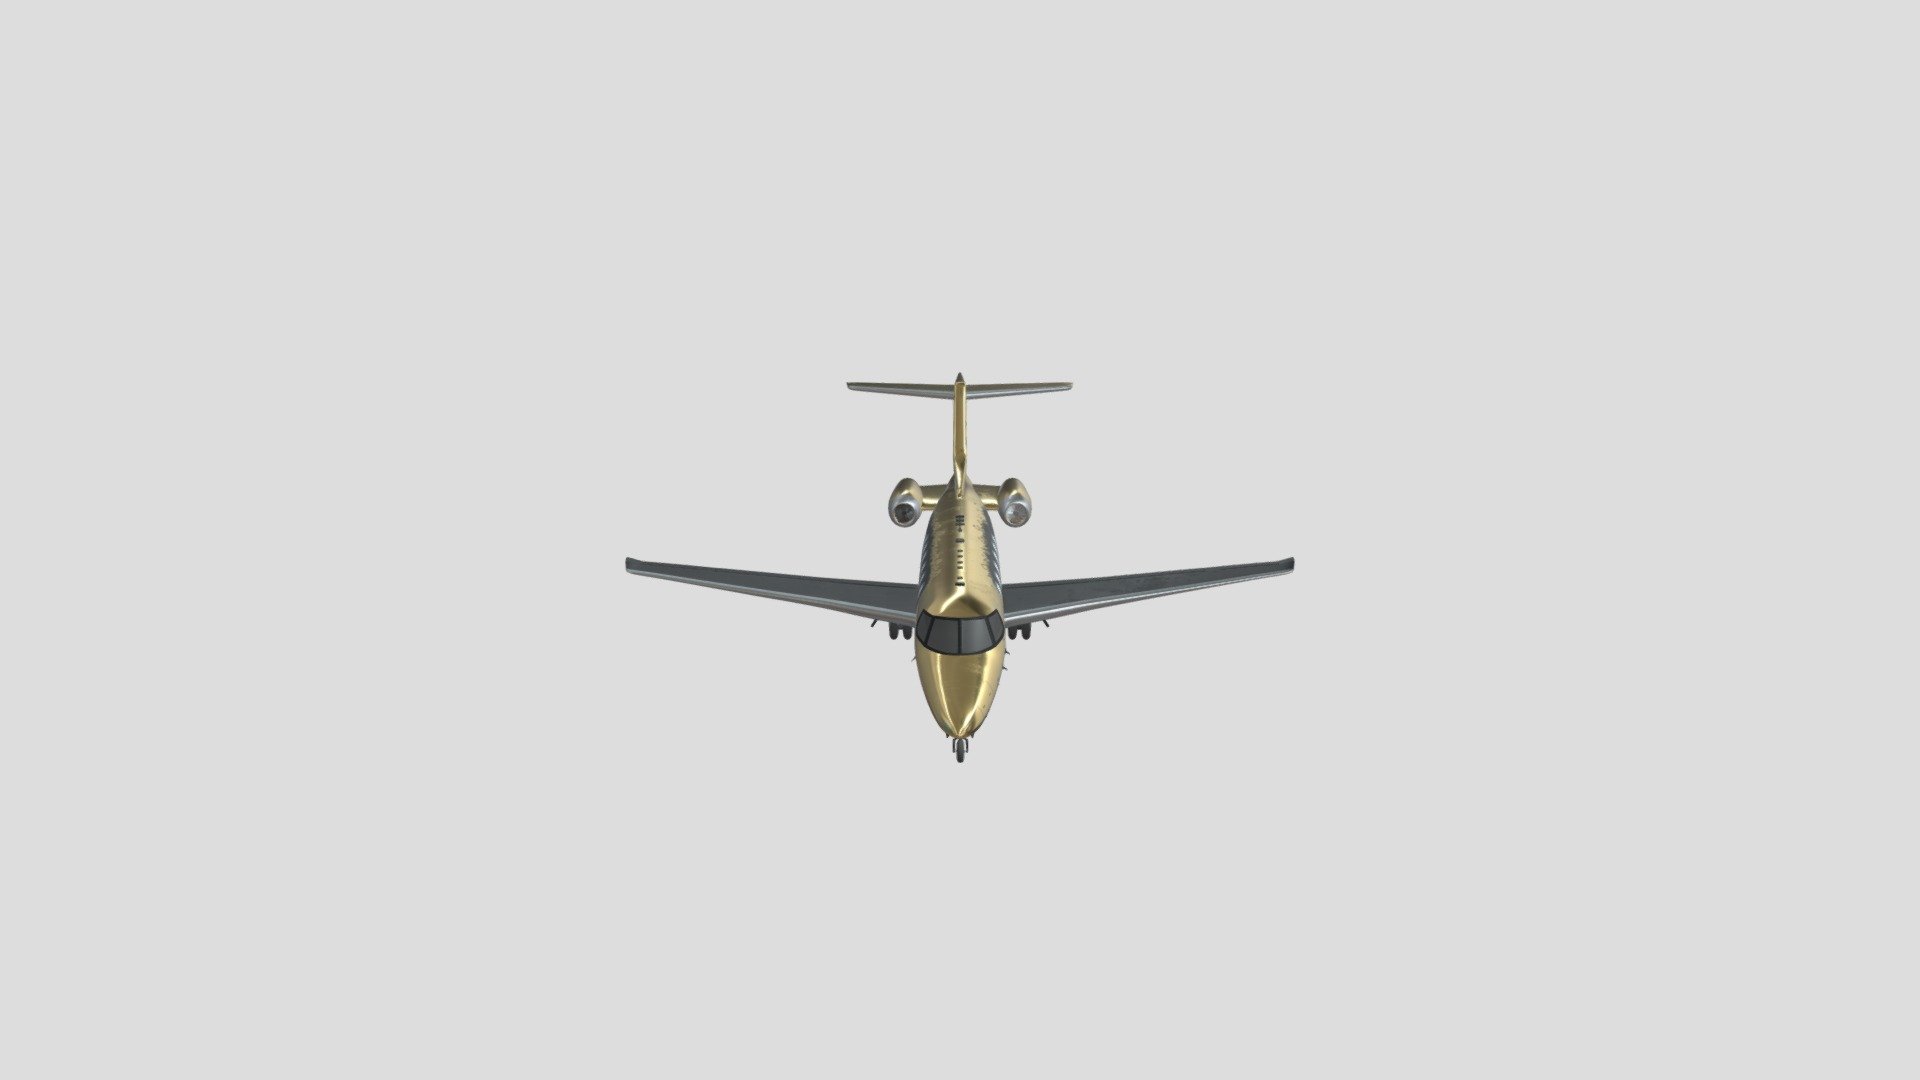 3D model of the Pilatus PC-24 plane in collaboration with Gucci for the creation of a super luxurious private jet to be included in a Grand Theft Auto DLC 3d model